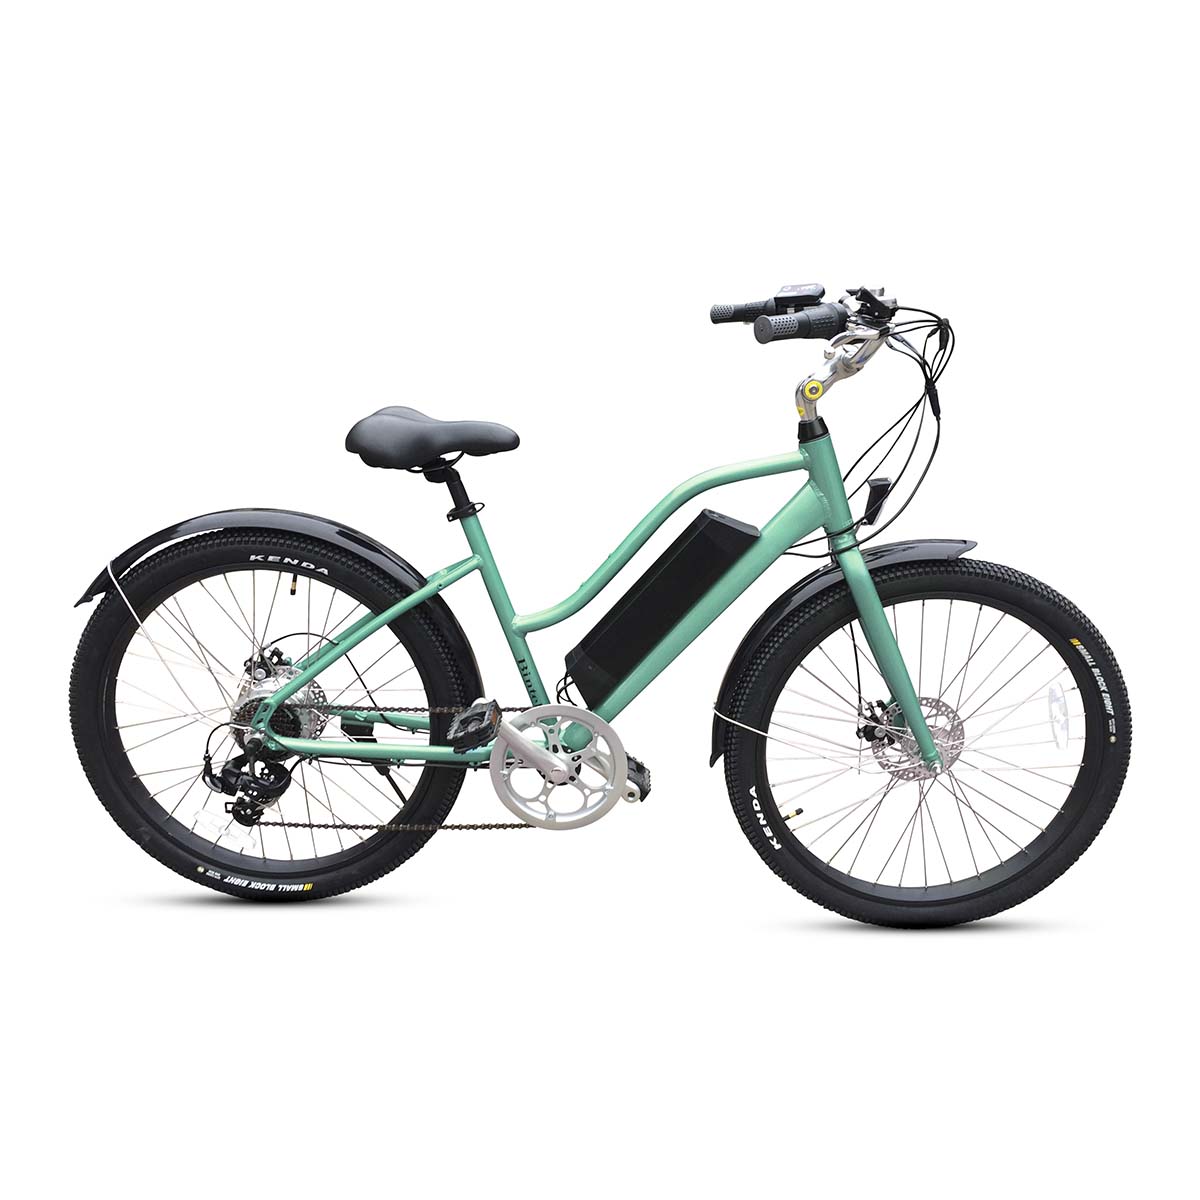 The Mint colour bintelli B1 electric bicycle with 350w and 20mph speed